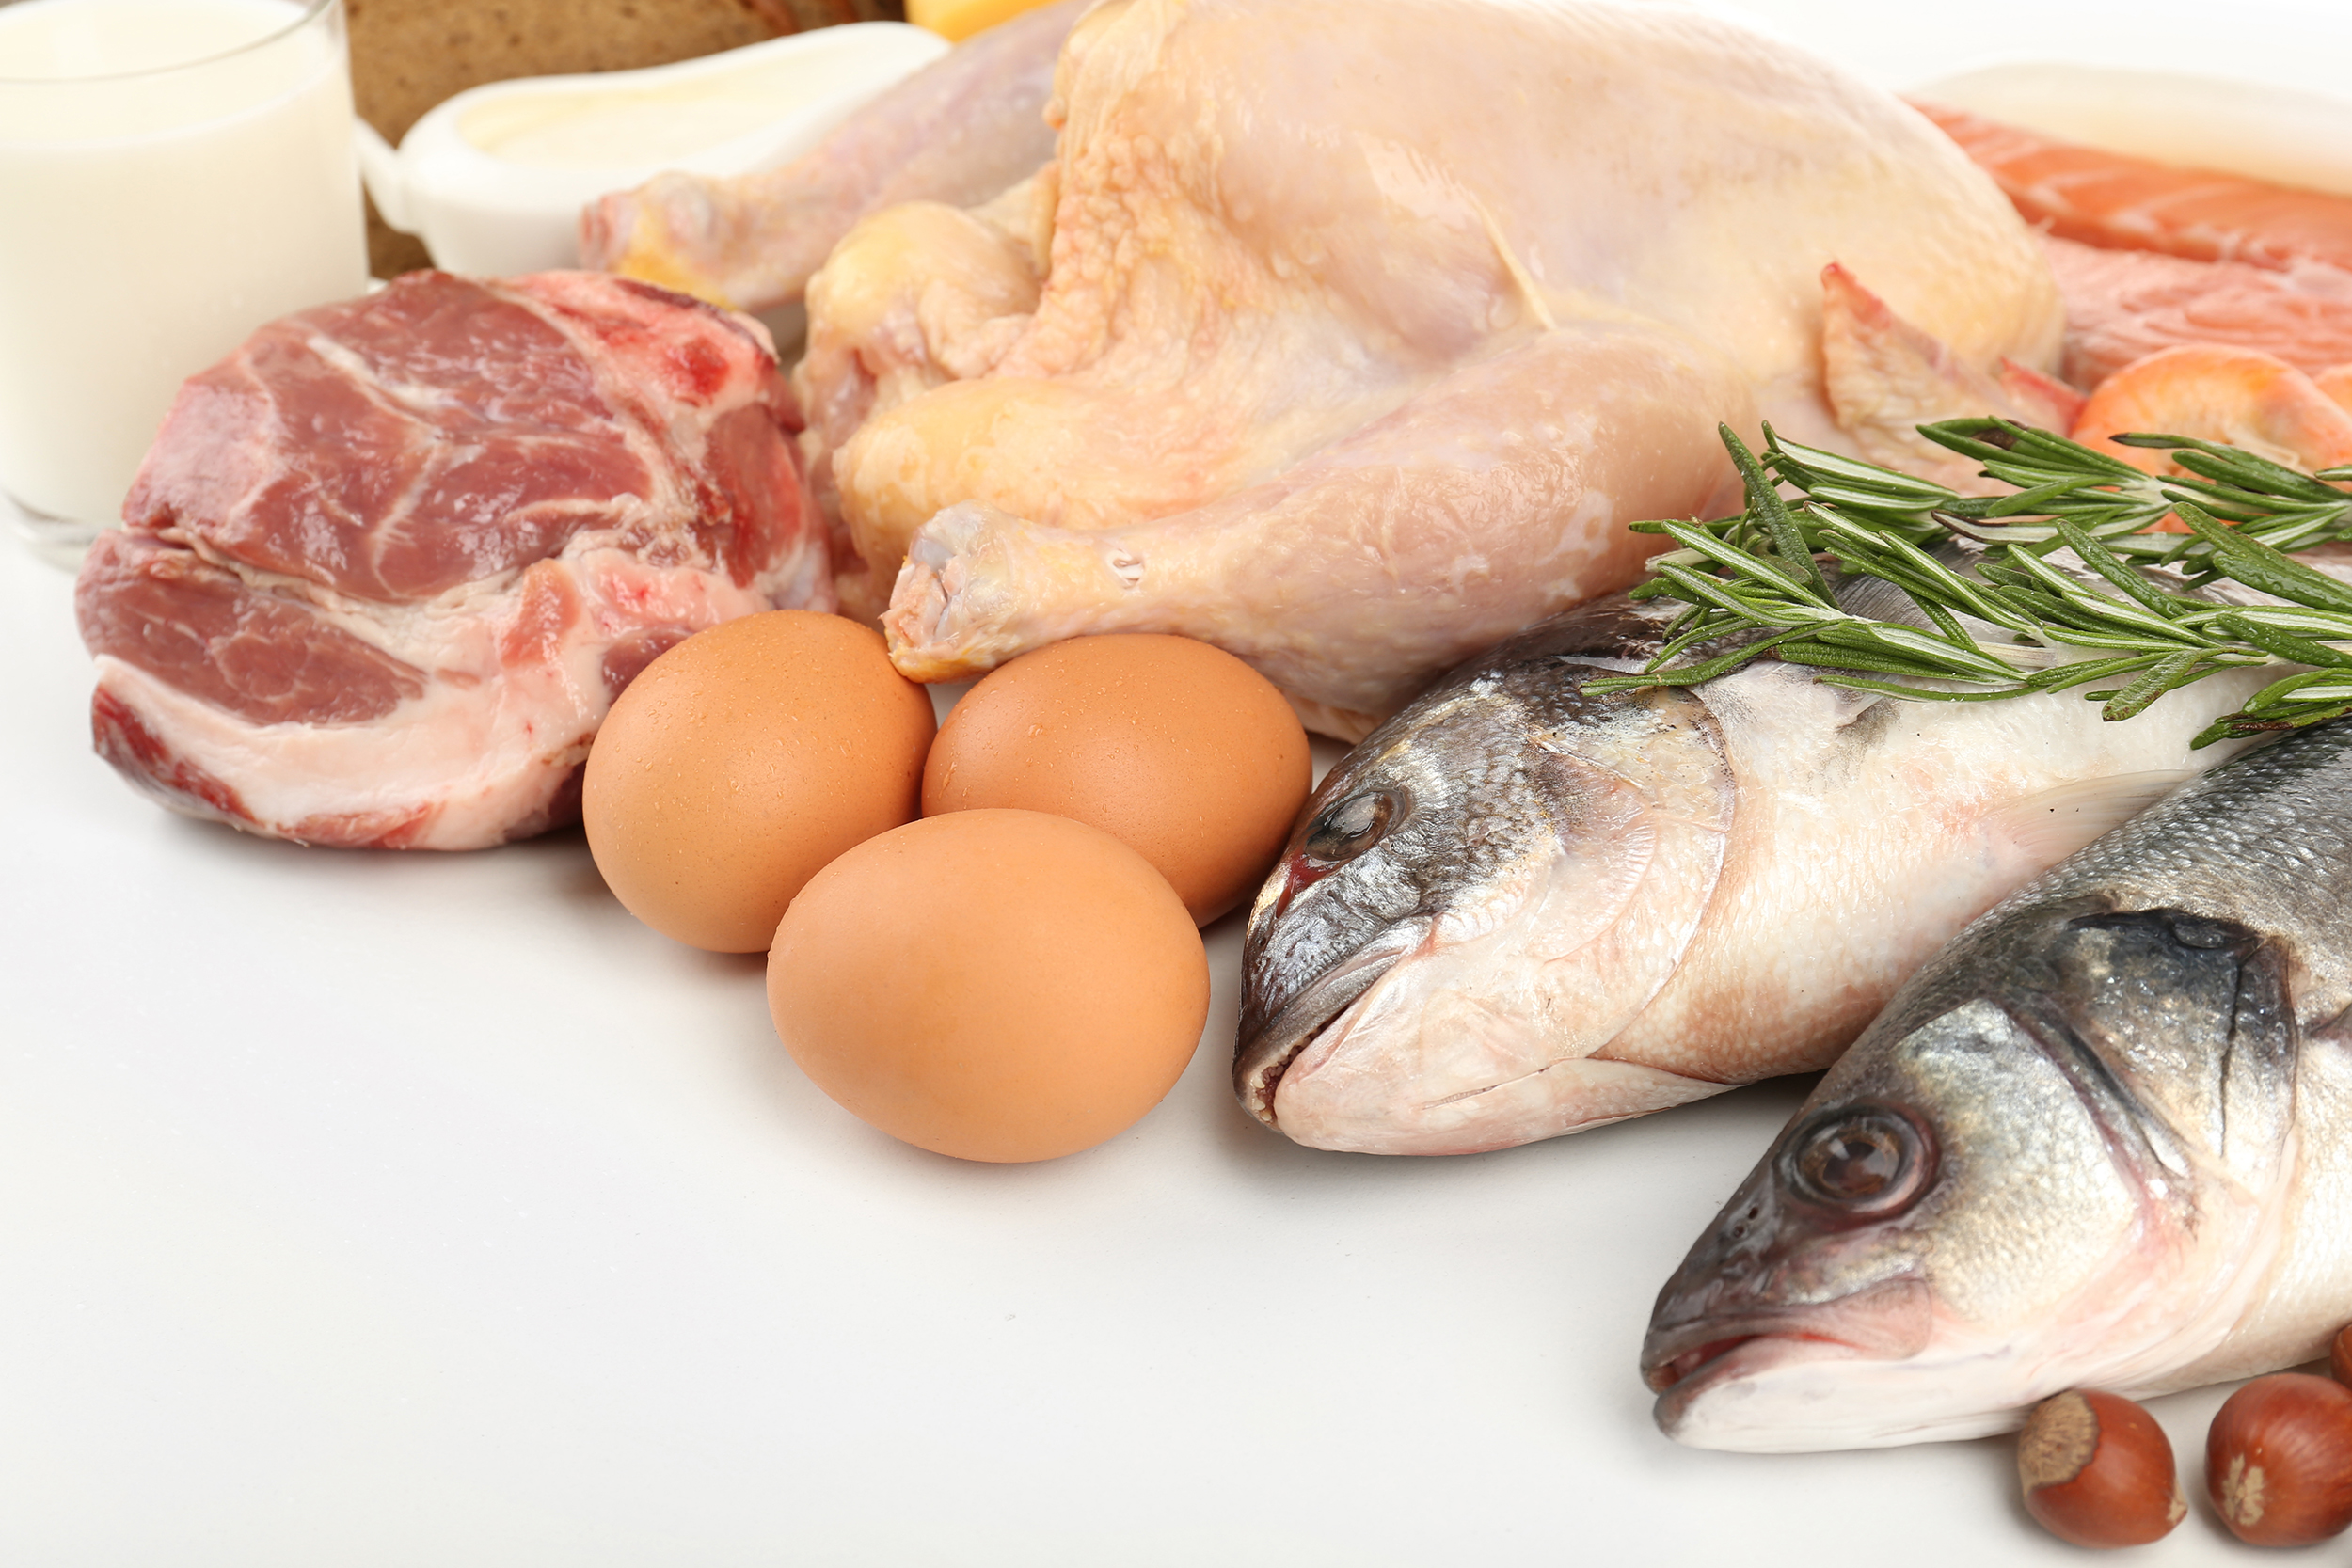 eat chicken or fish, which is healthier